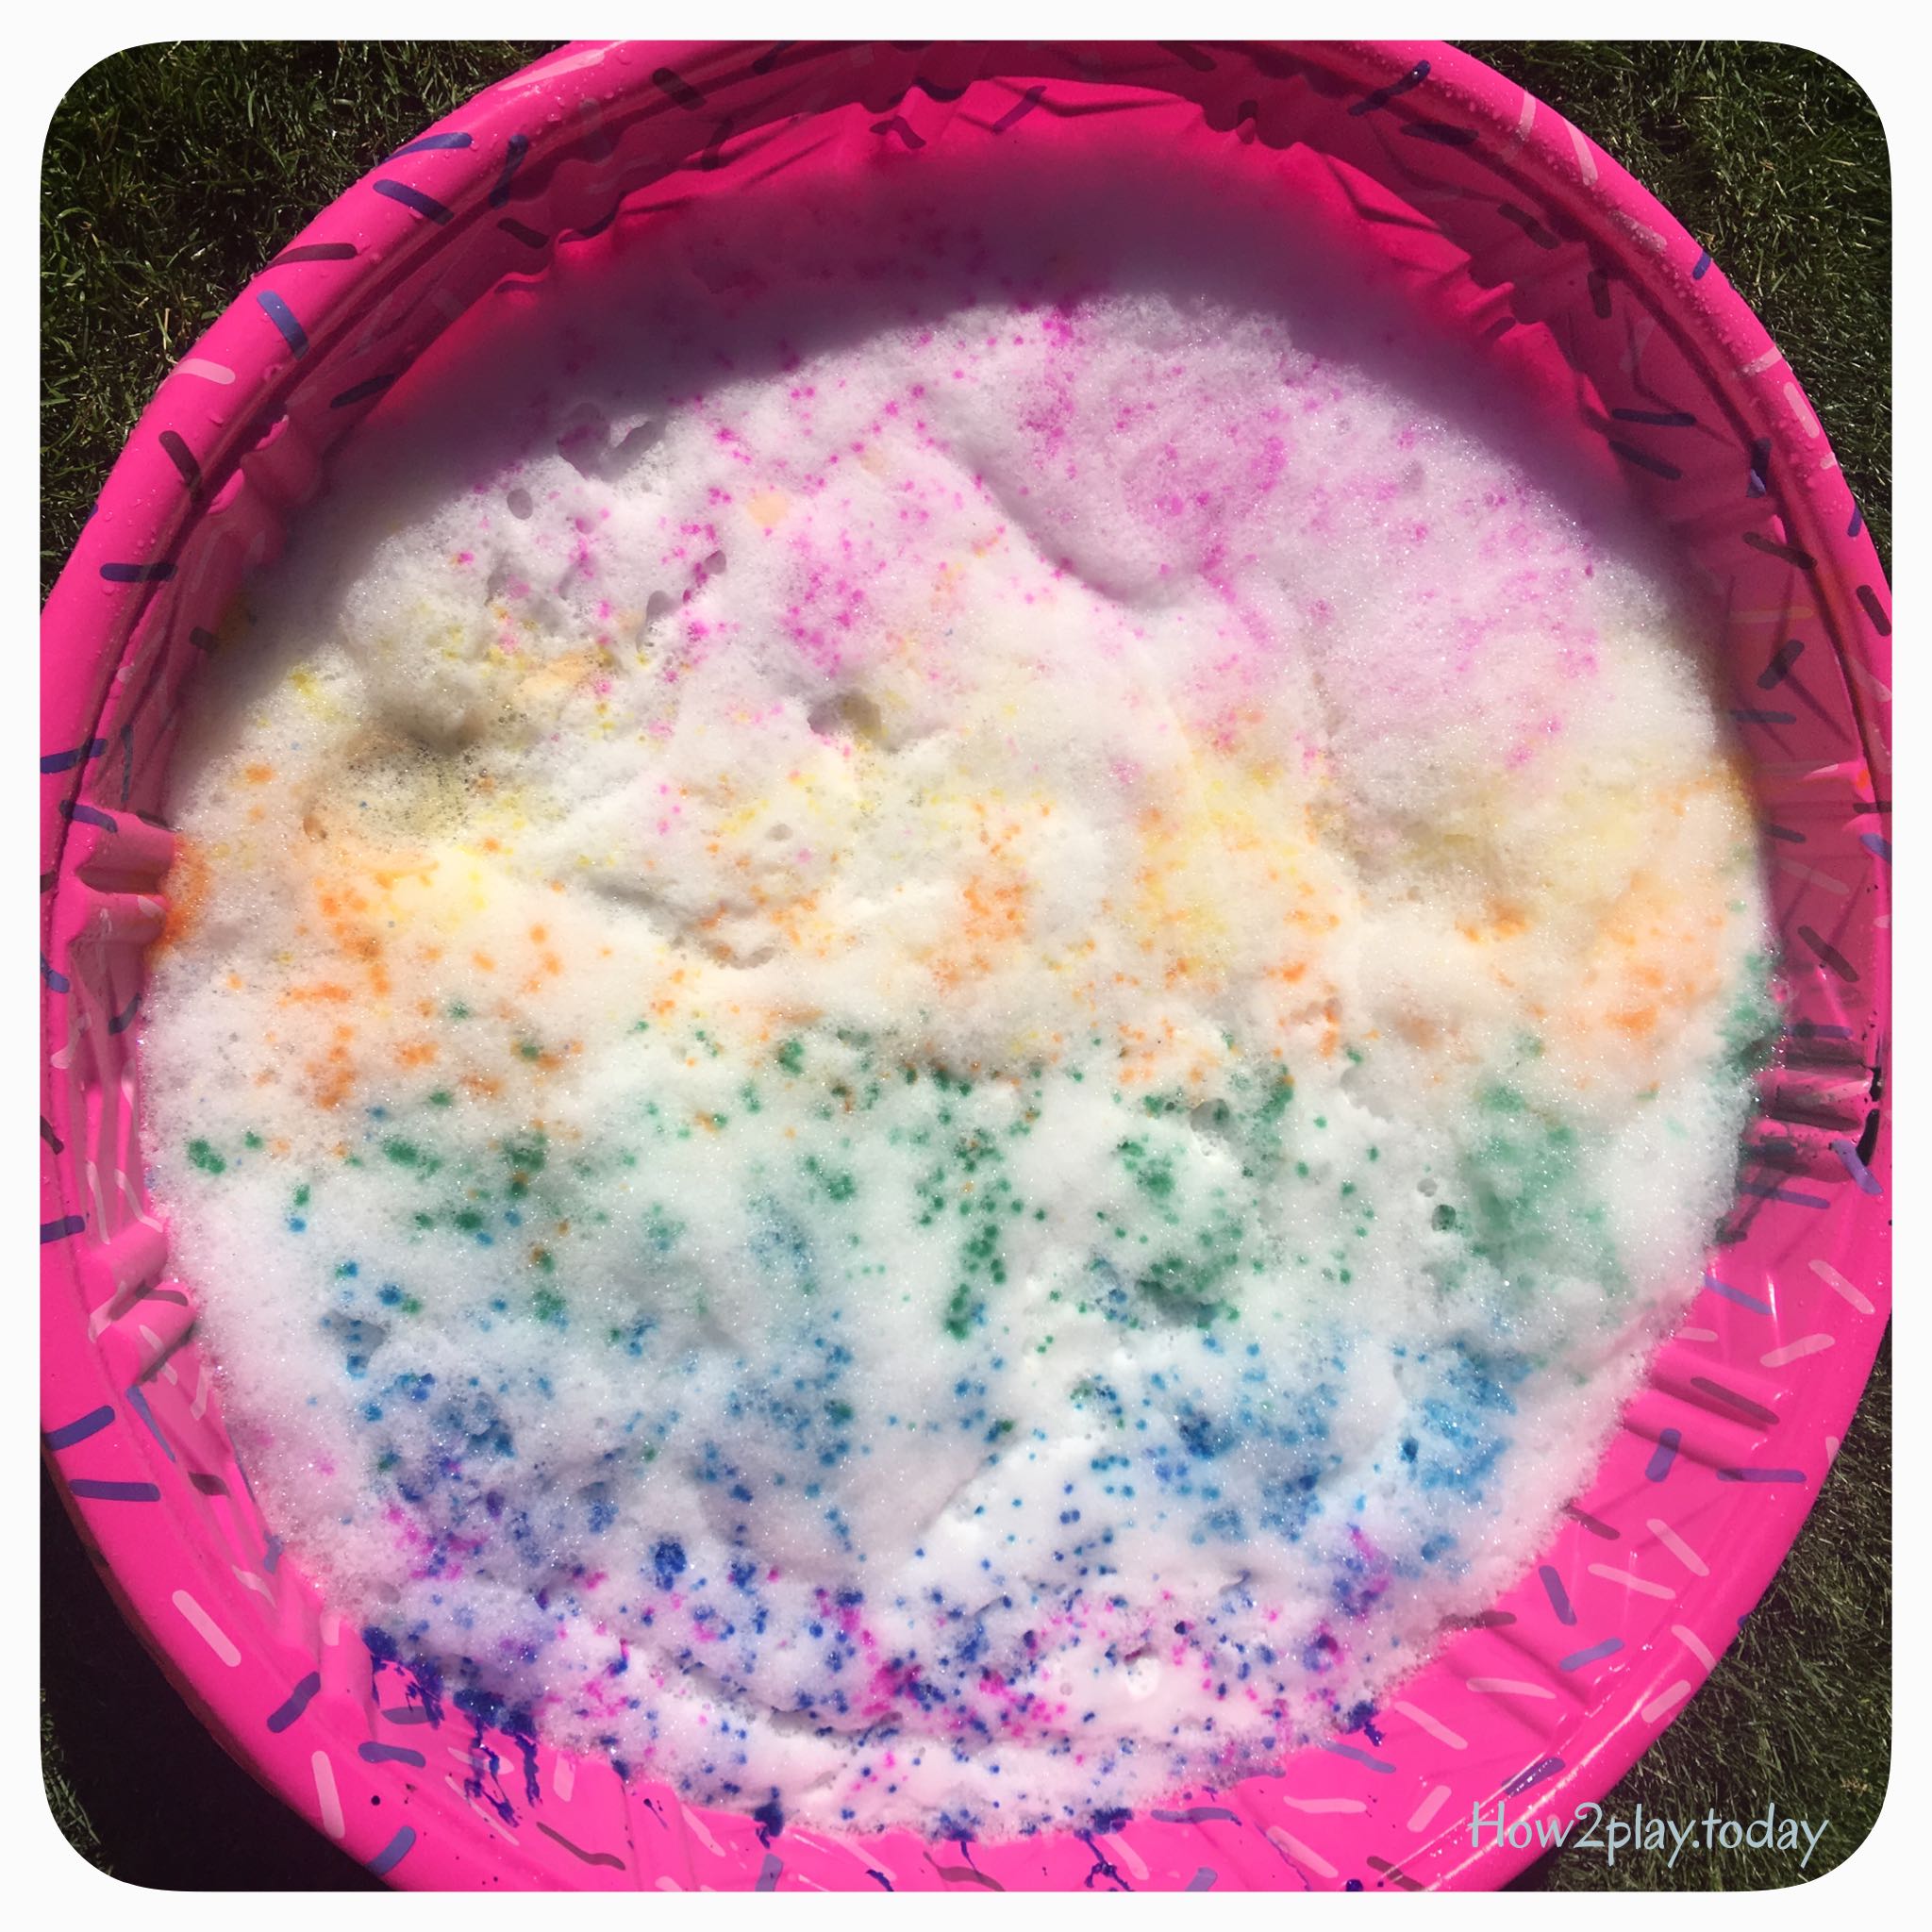 Creating simple sensory activities for kids to enjoy while exploring colors and bubbles.